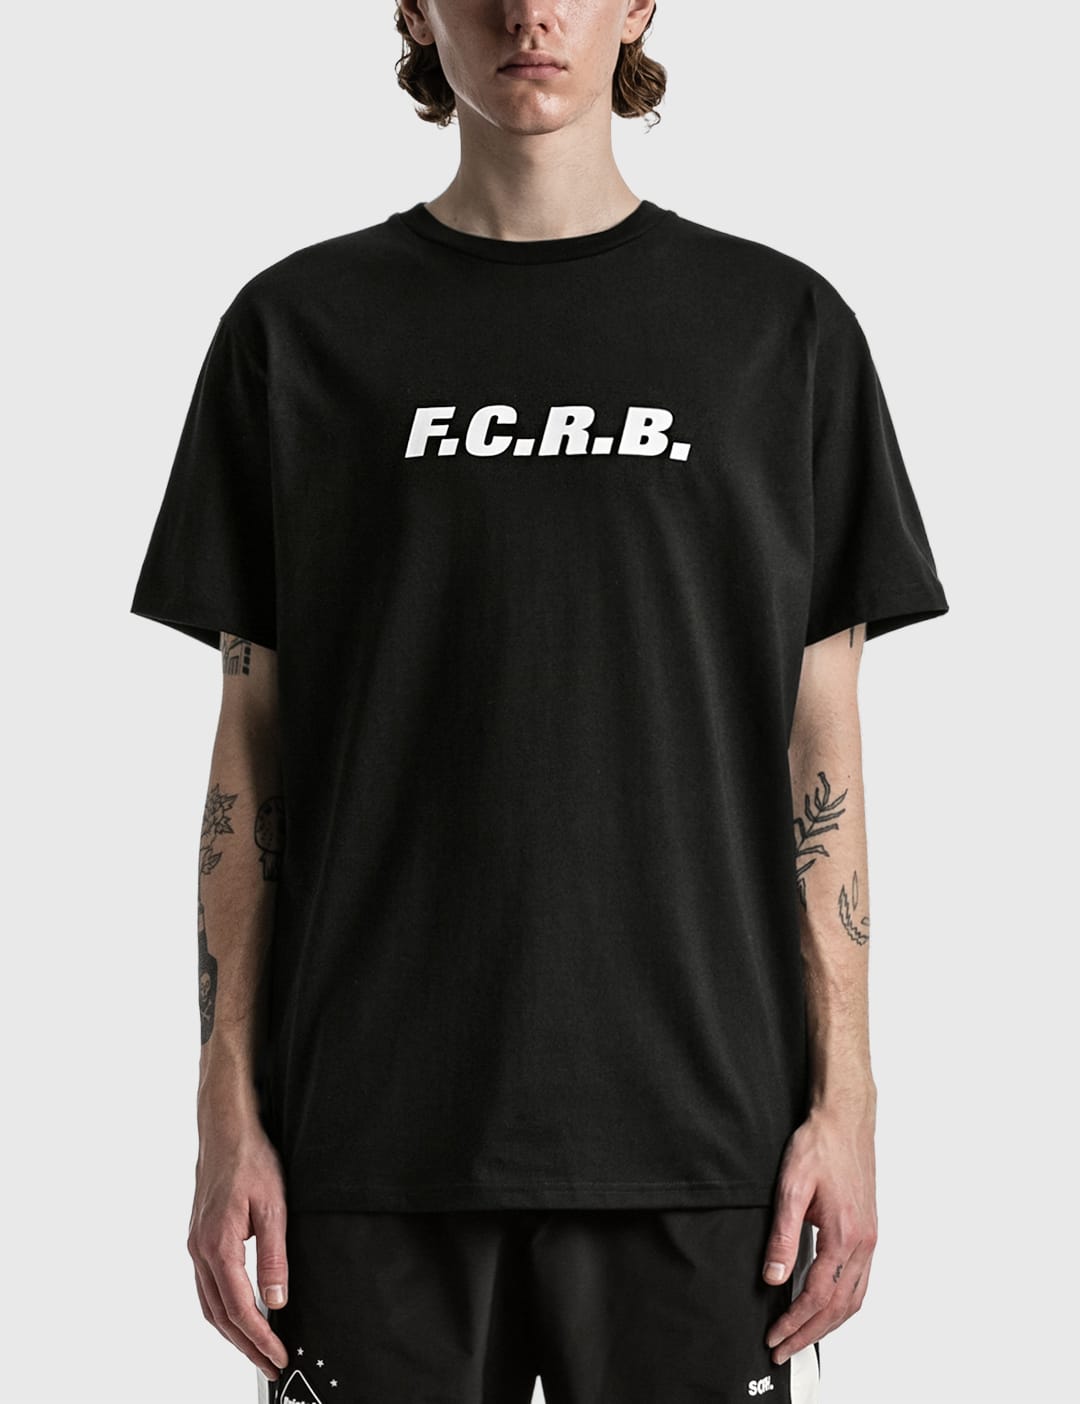 FCRB. AUTHENTIC T-SHIRT